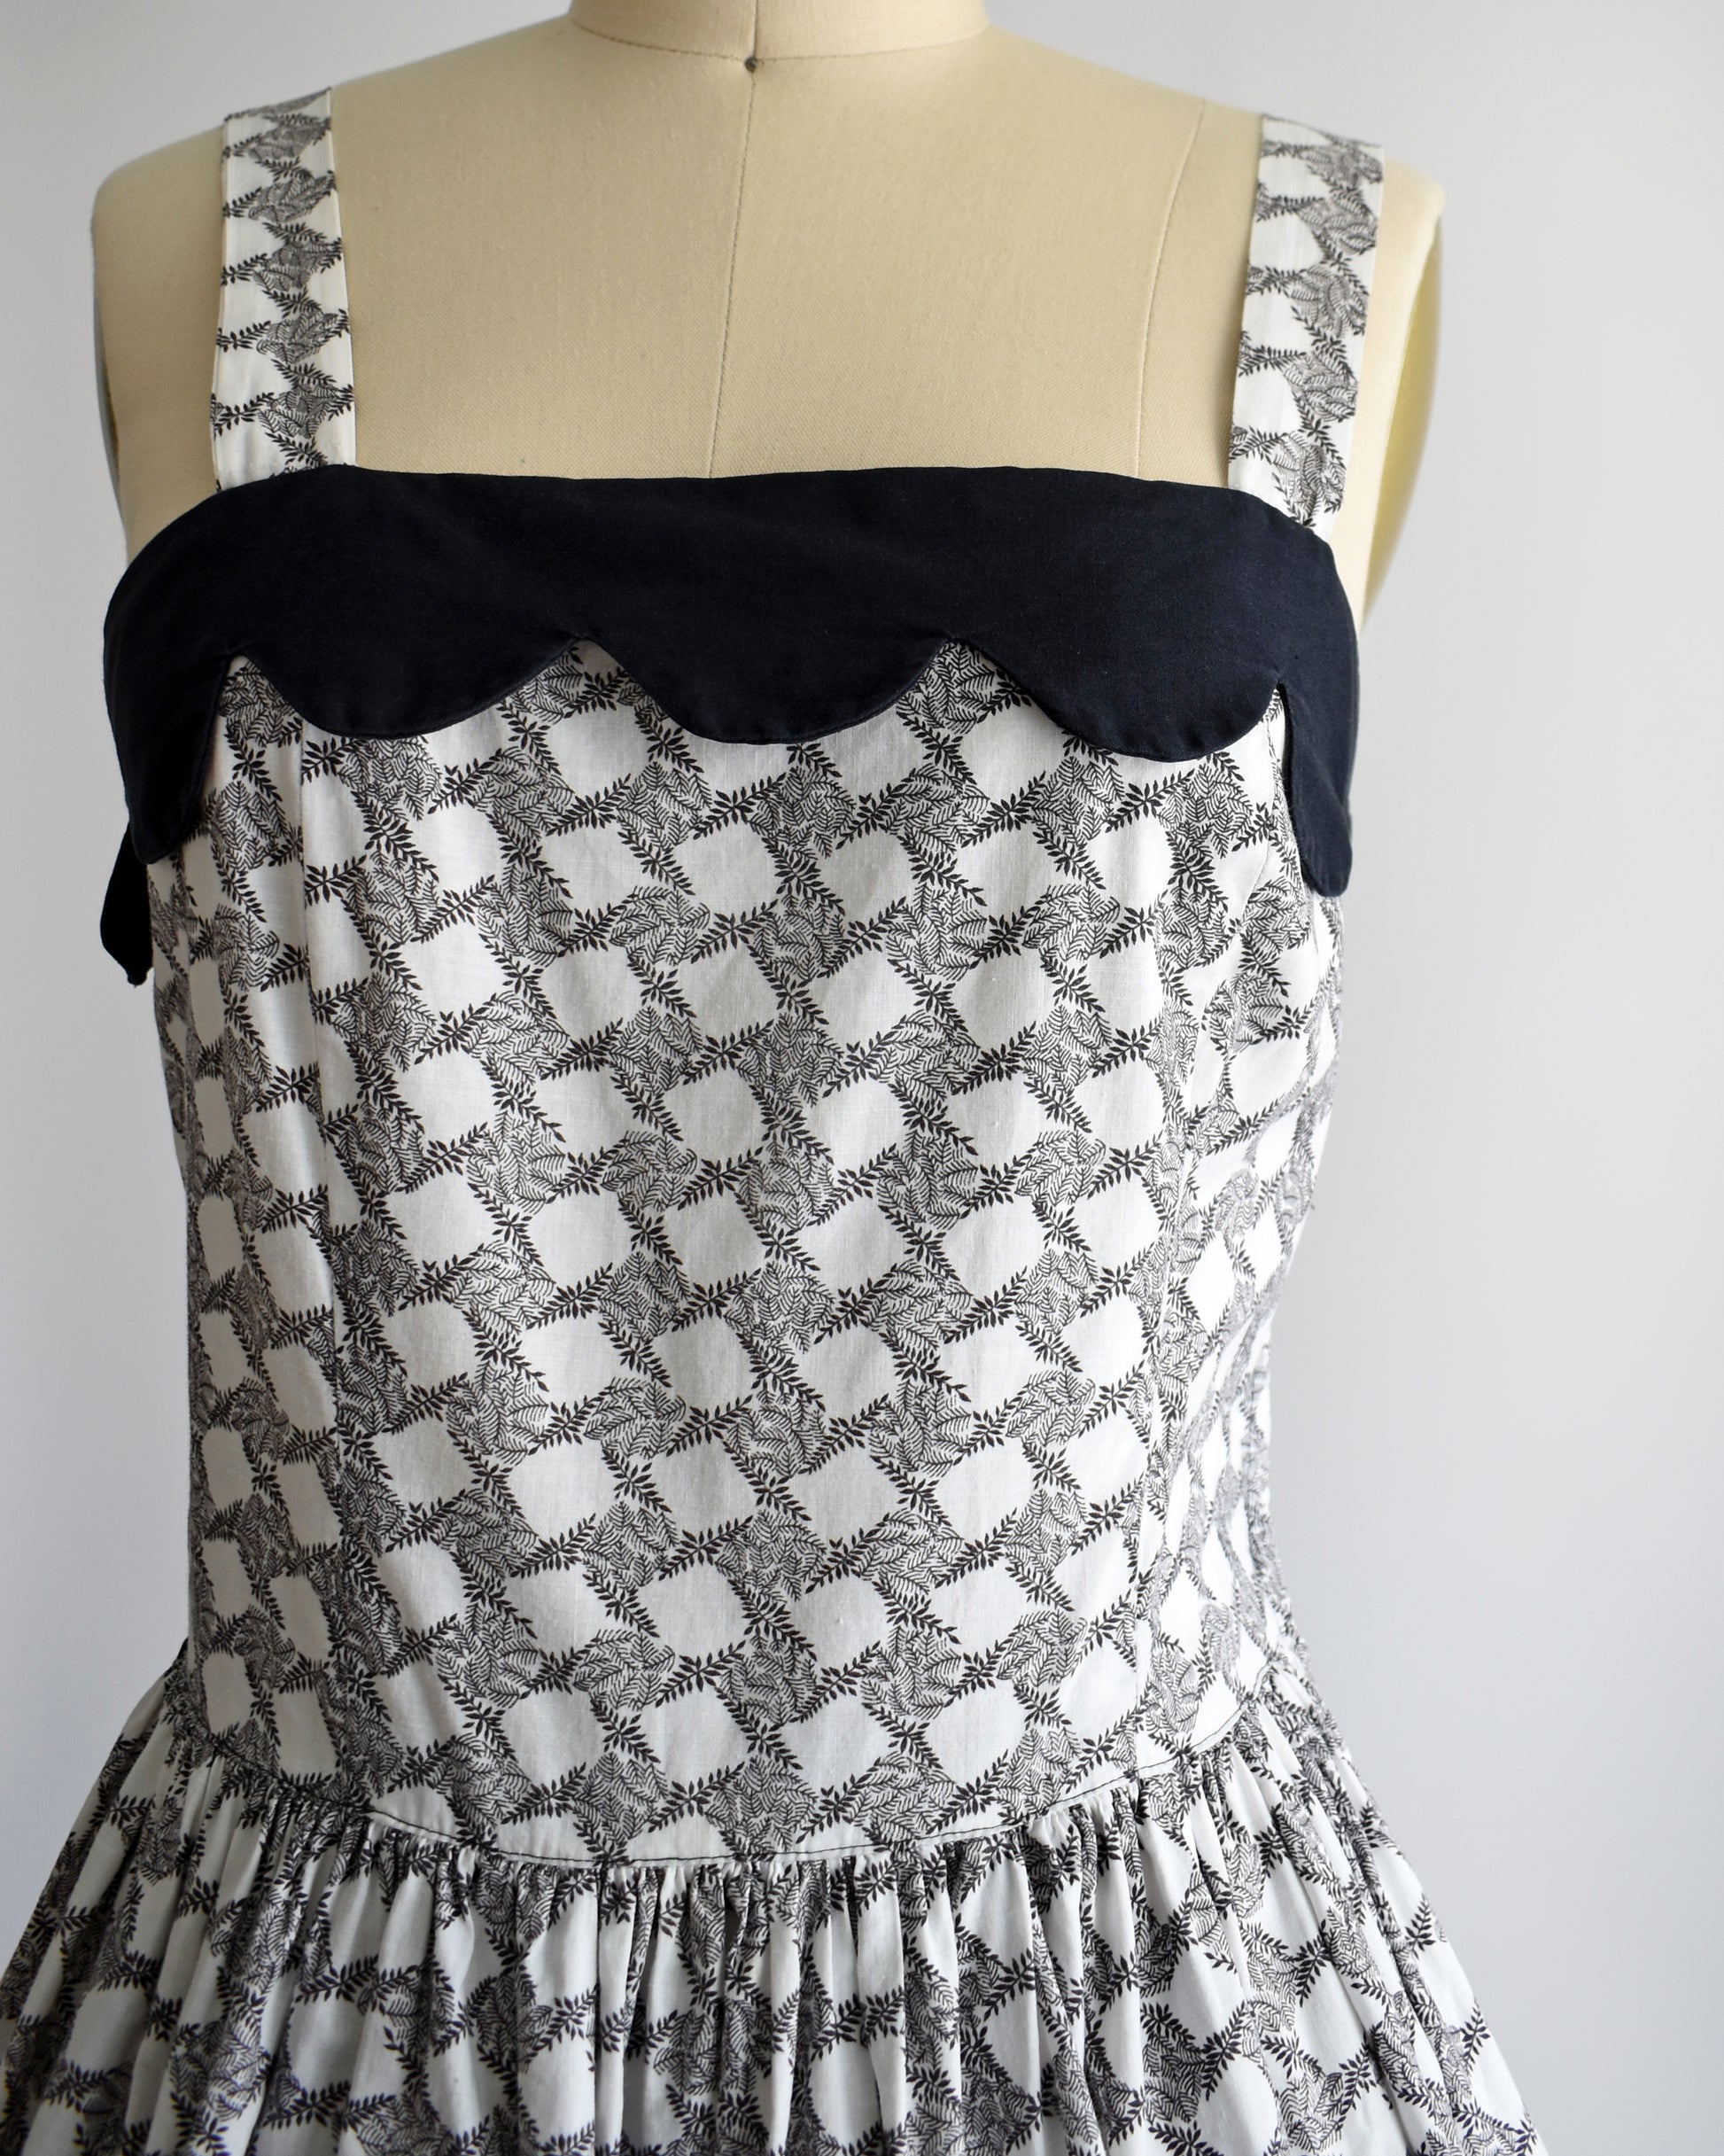 Close up of the bodice which features a black scalloped neckline and black fern print.